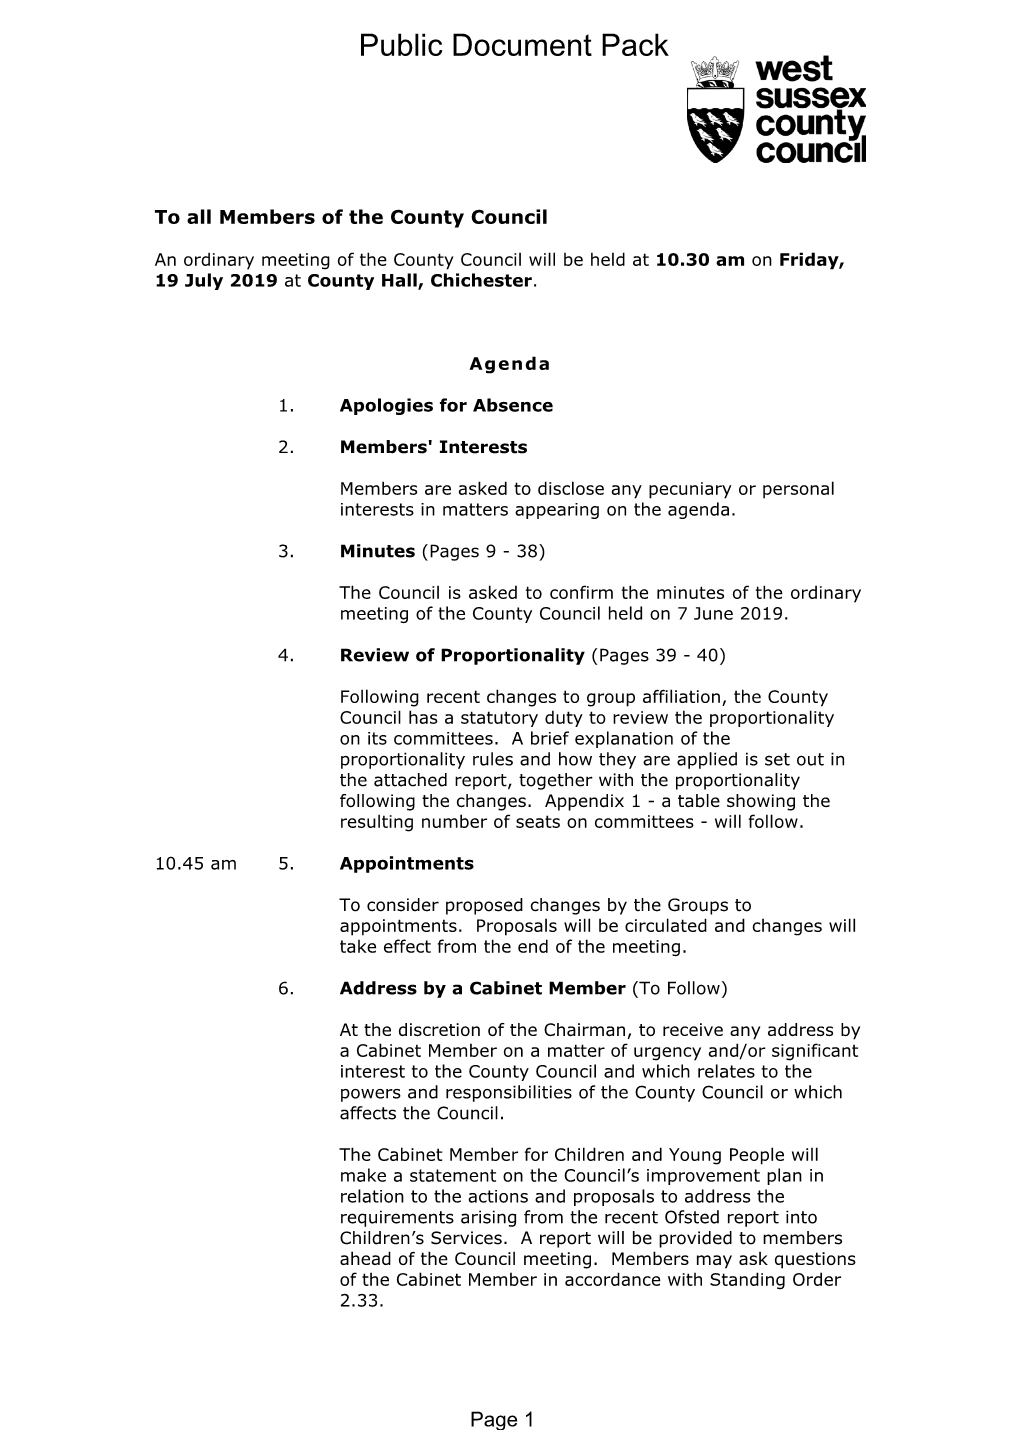 (Public Pack)Agenda Document for County Council, 19/07/2019 10:30